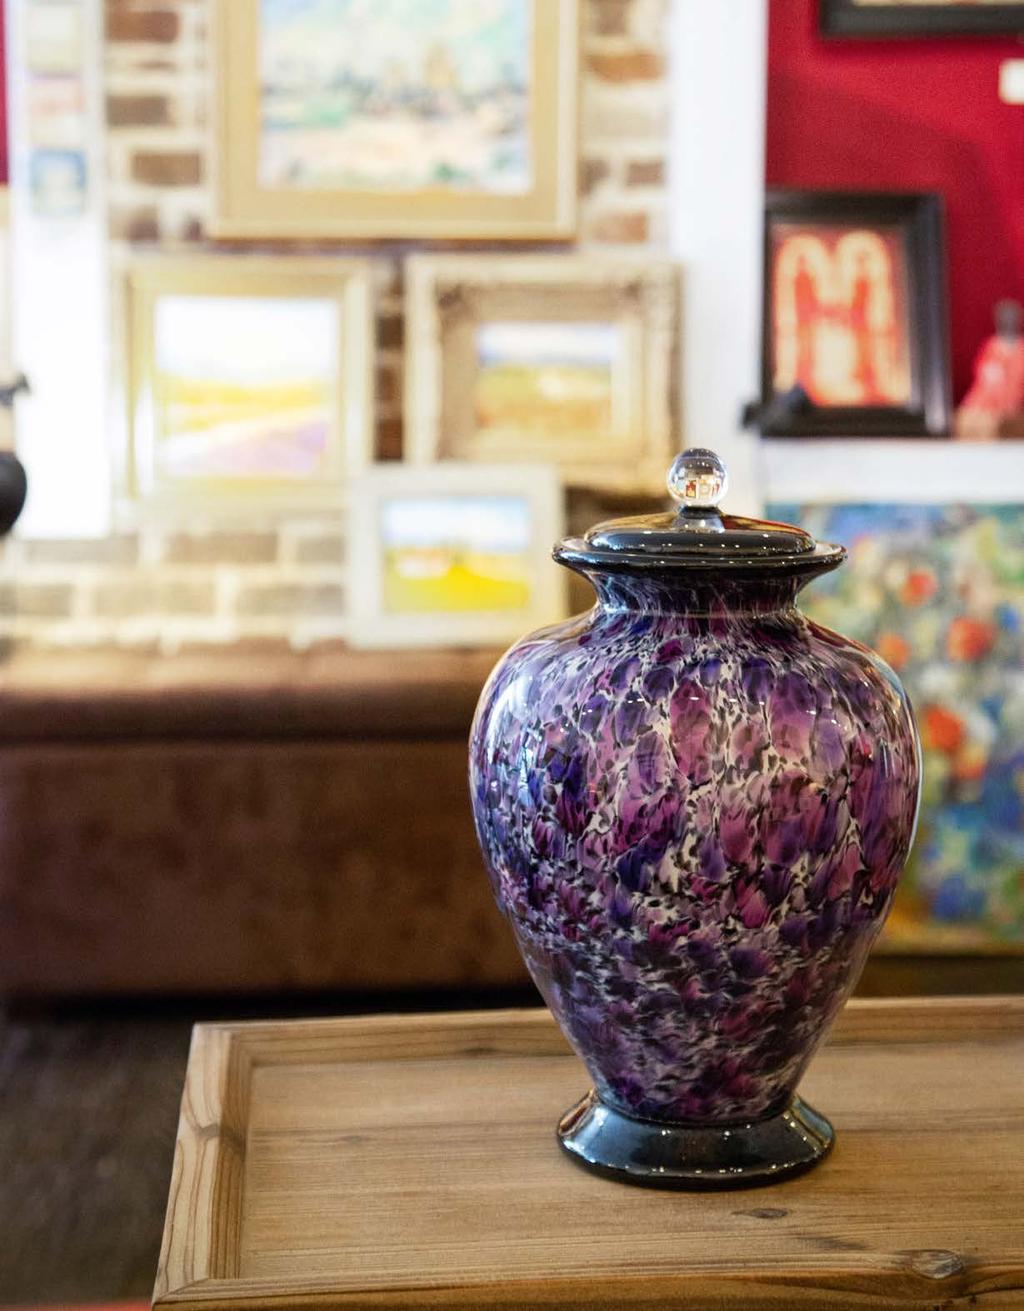 Artistic urns One-of-a-kind glass urns are hand-blown with masterful artistry.